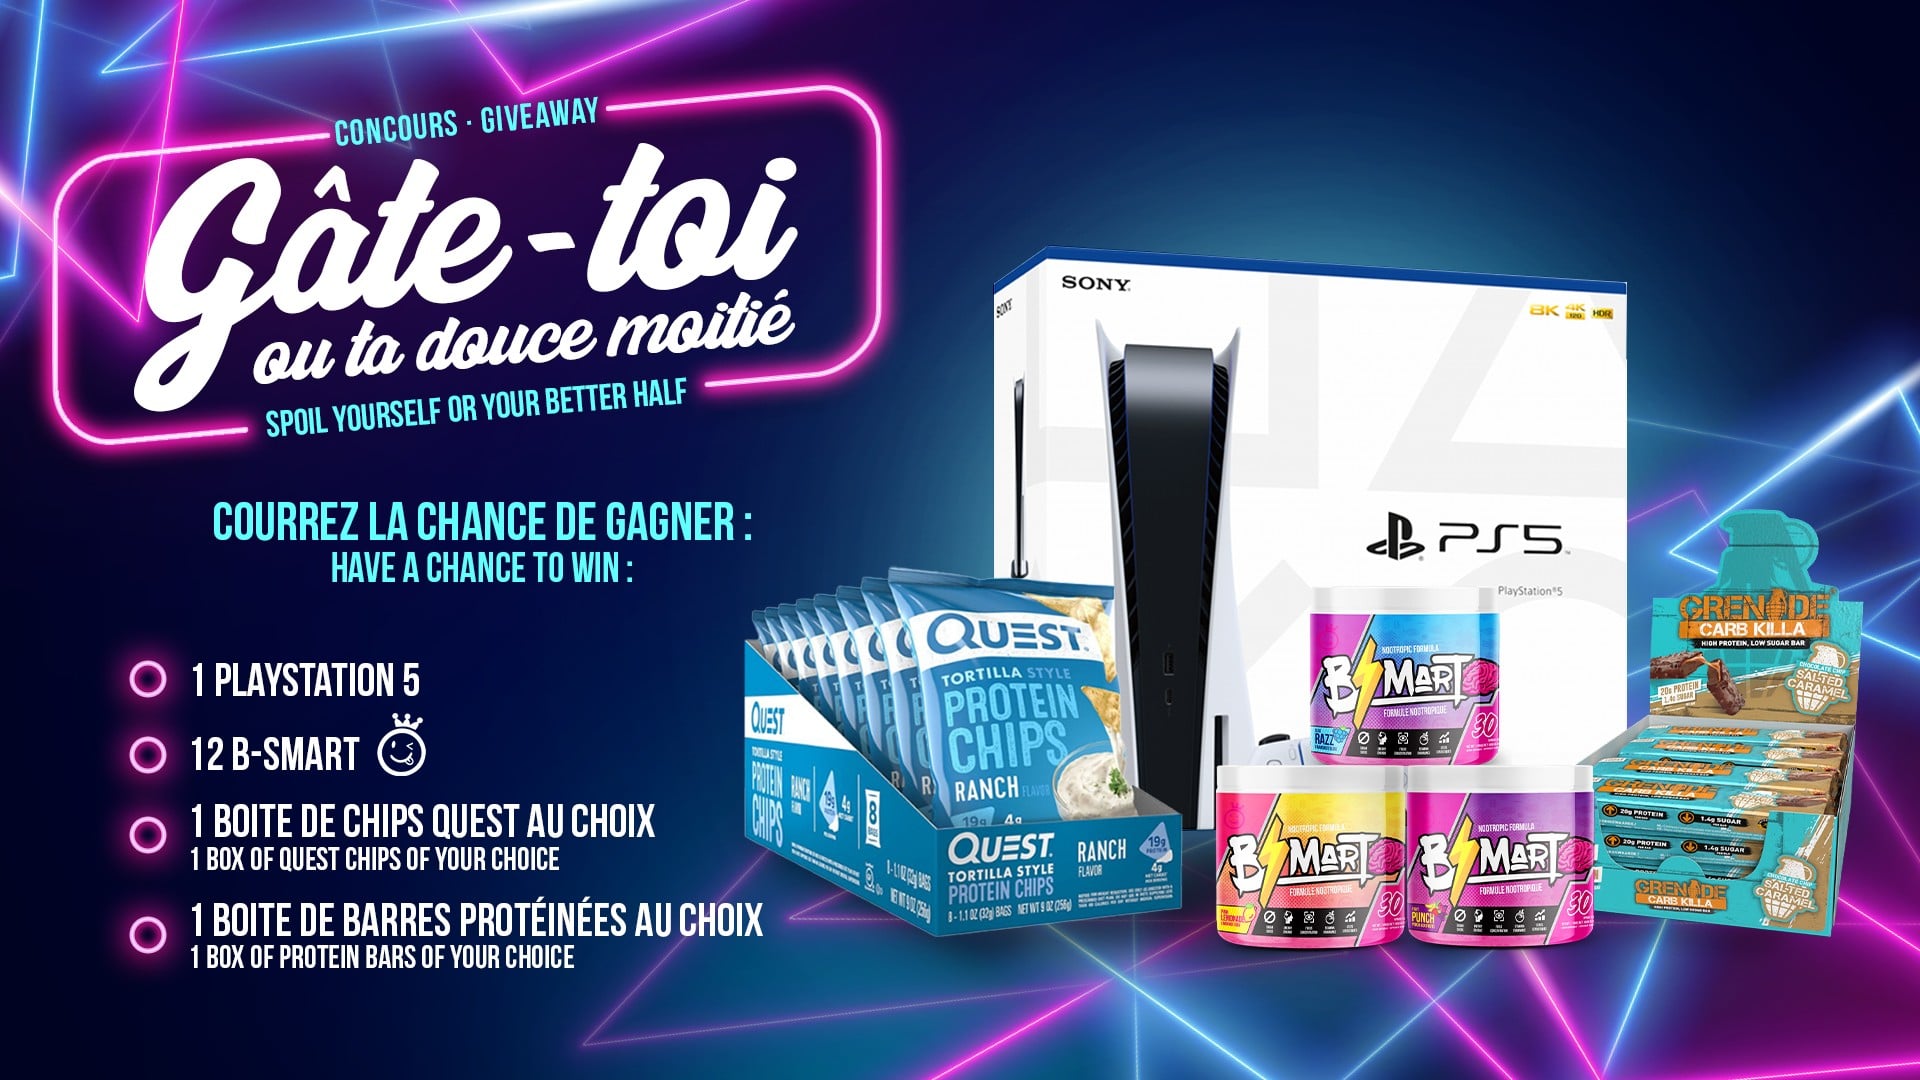 ps5 concours